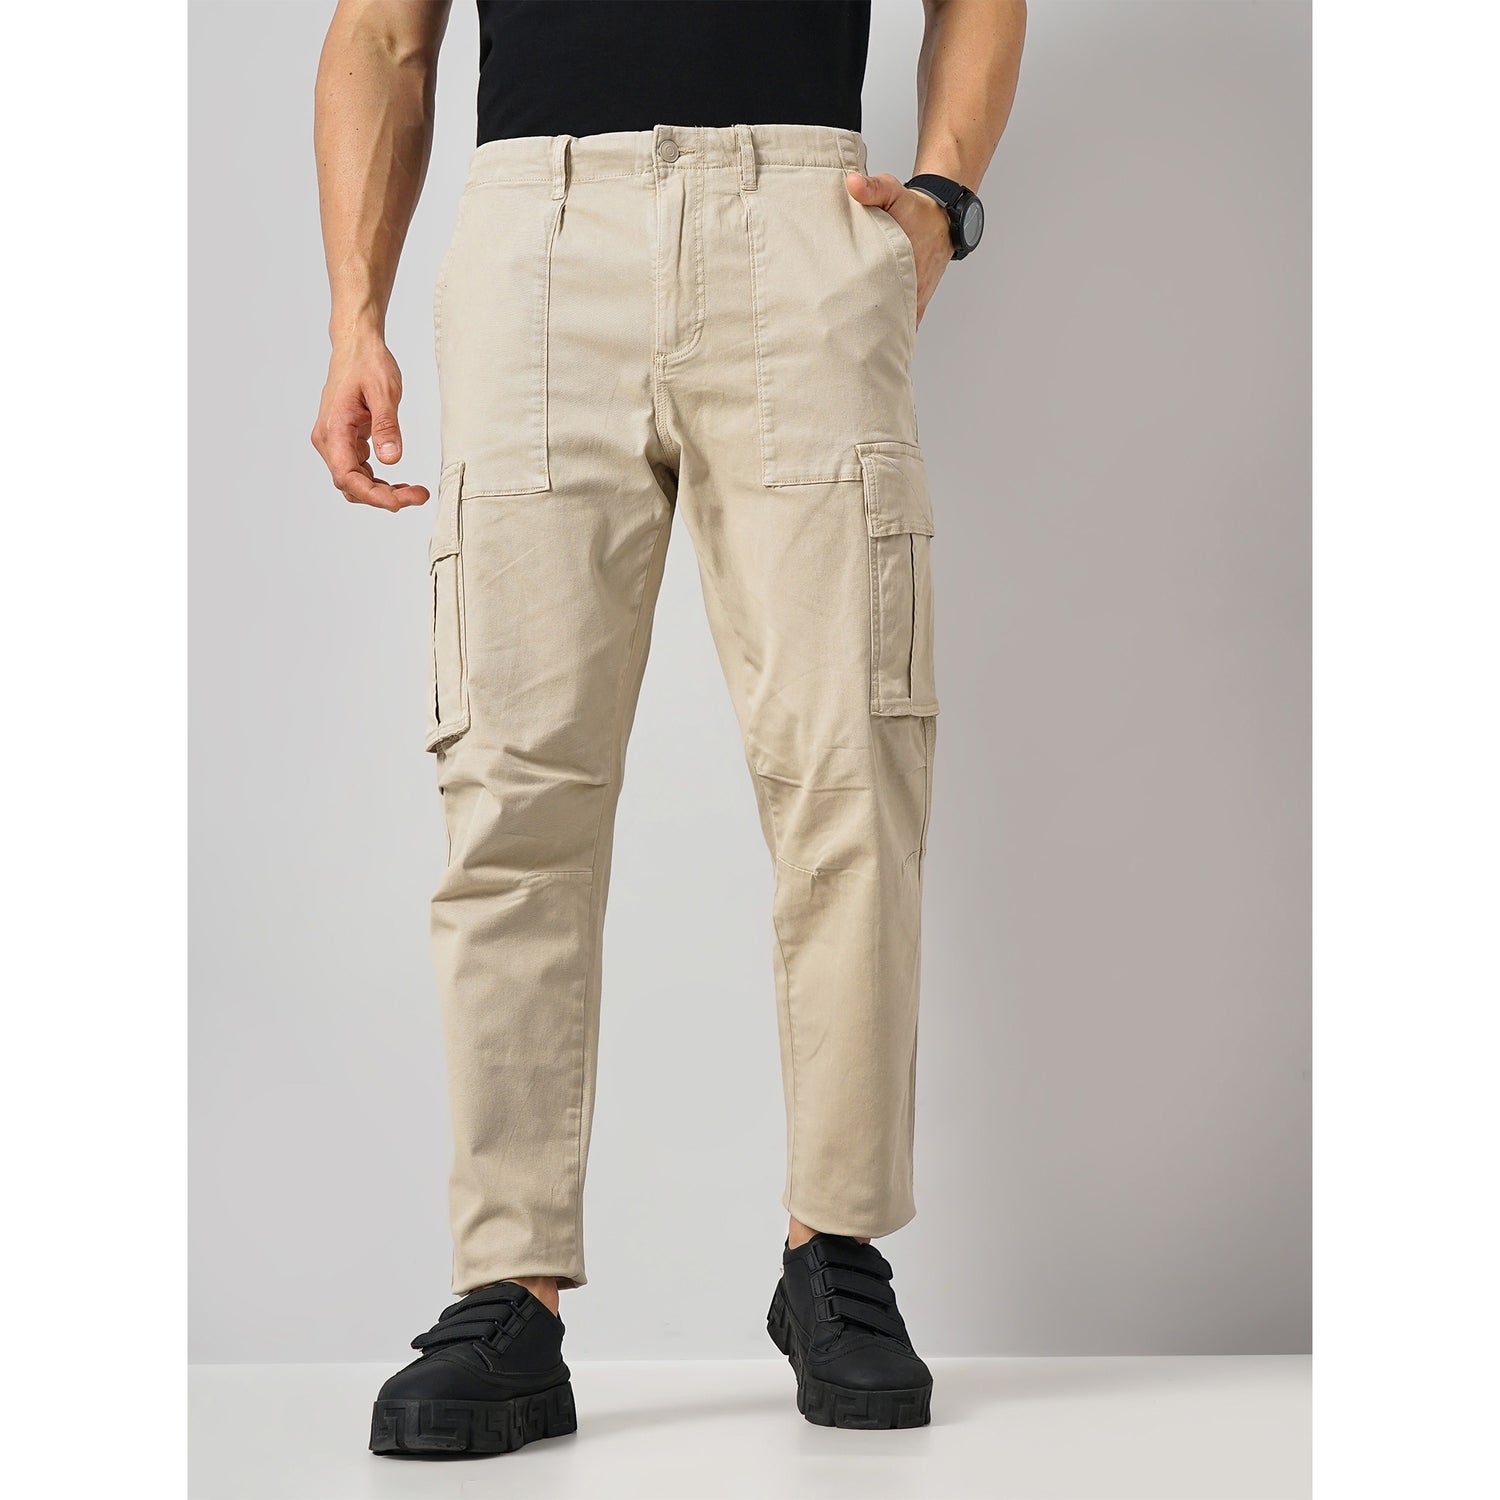 Solid Beige Cotton-Blend Trousers (DOGOIN)